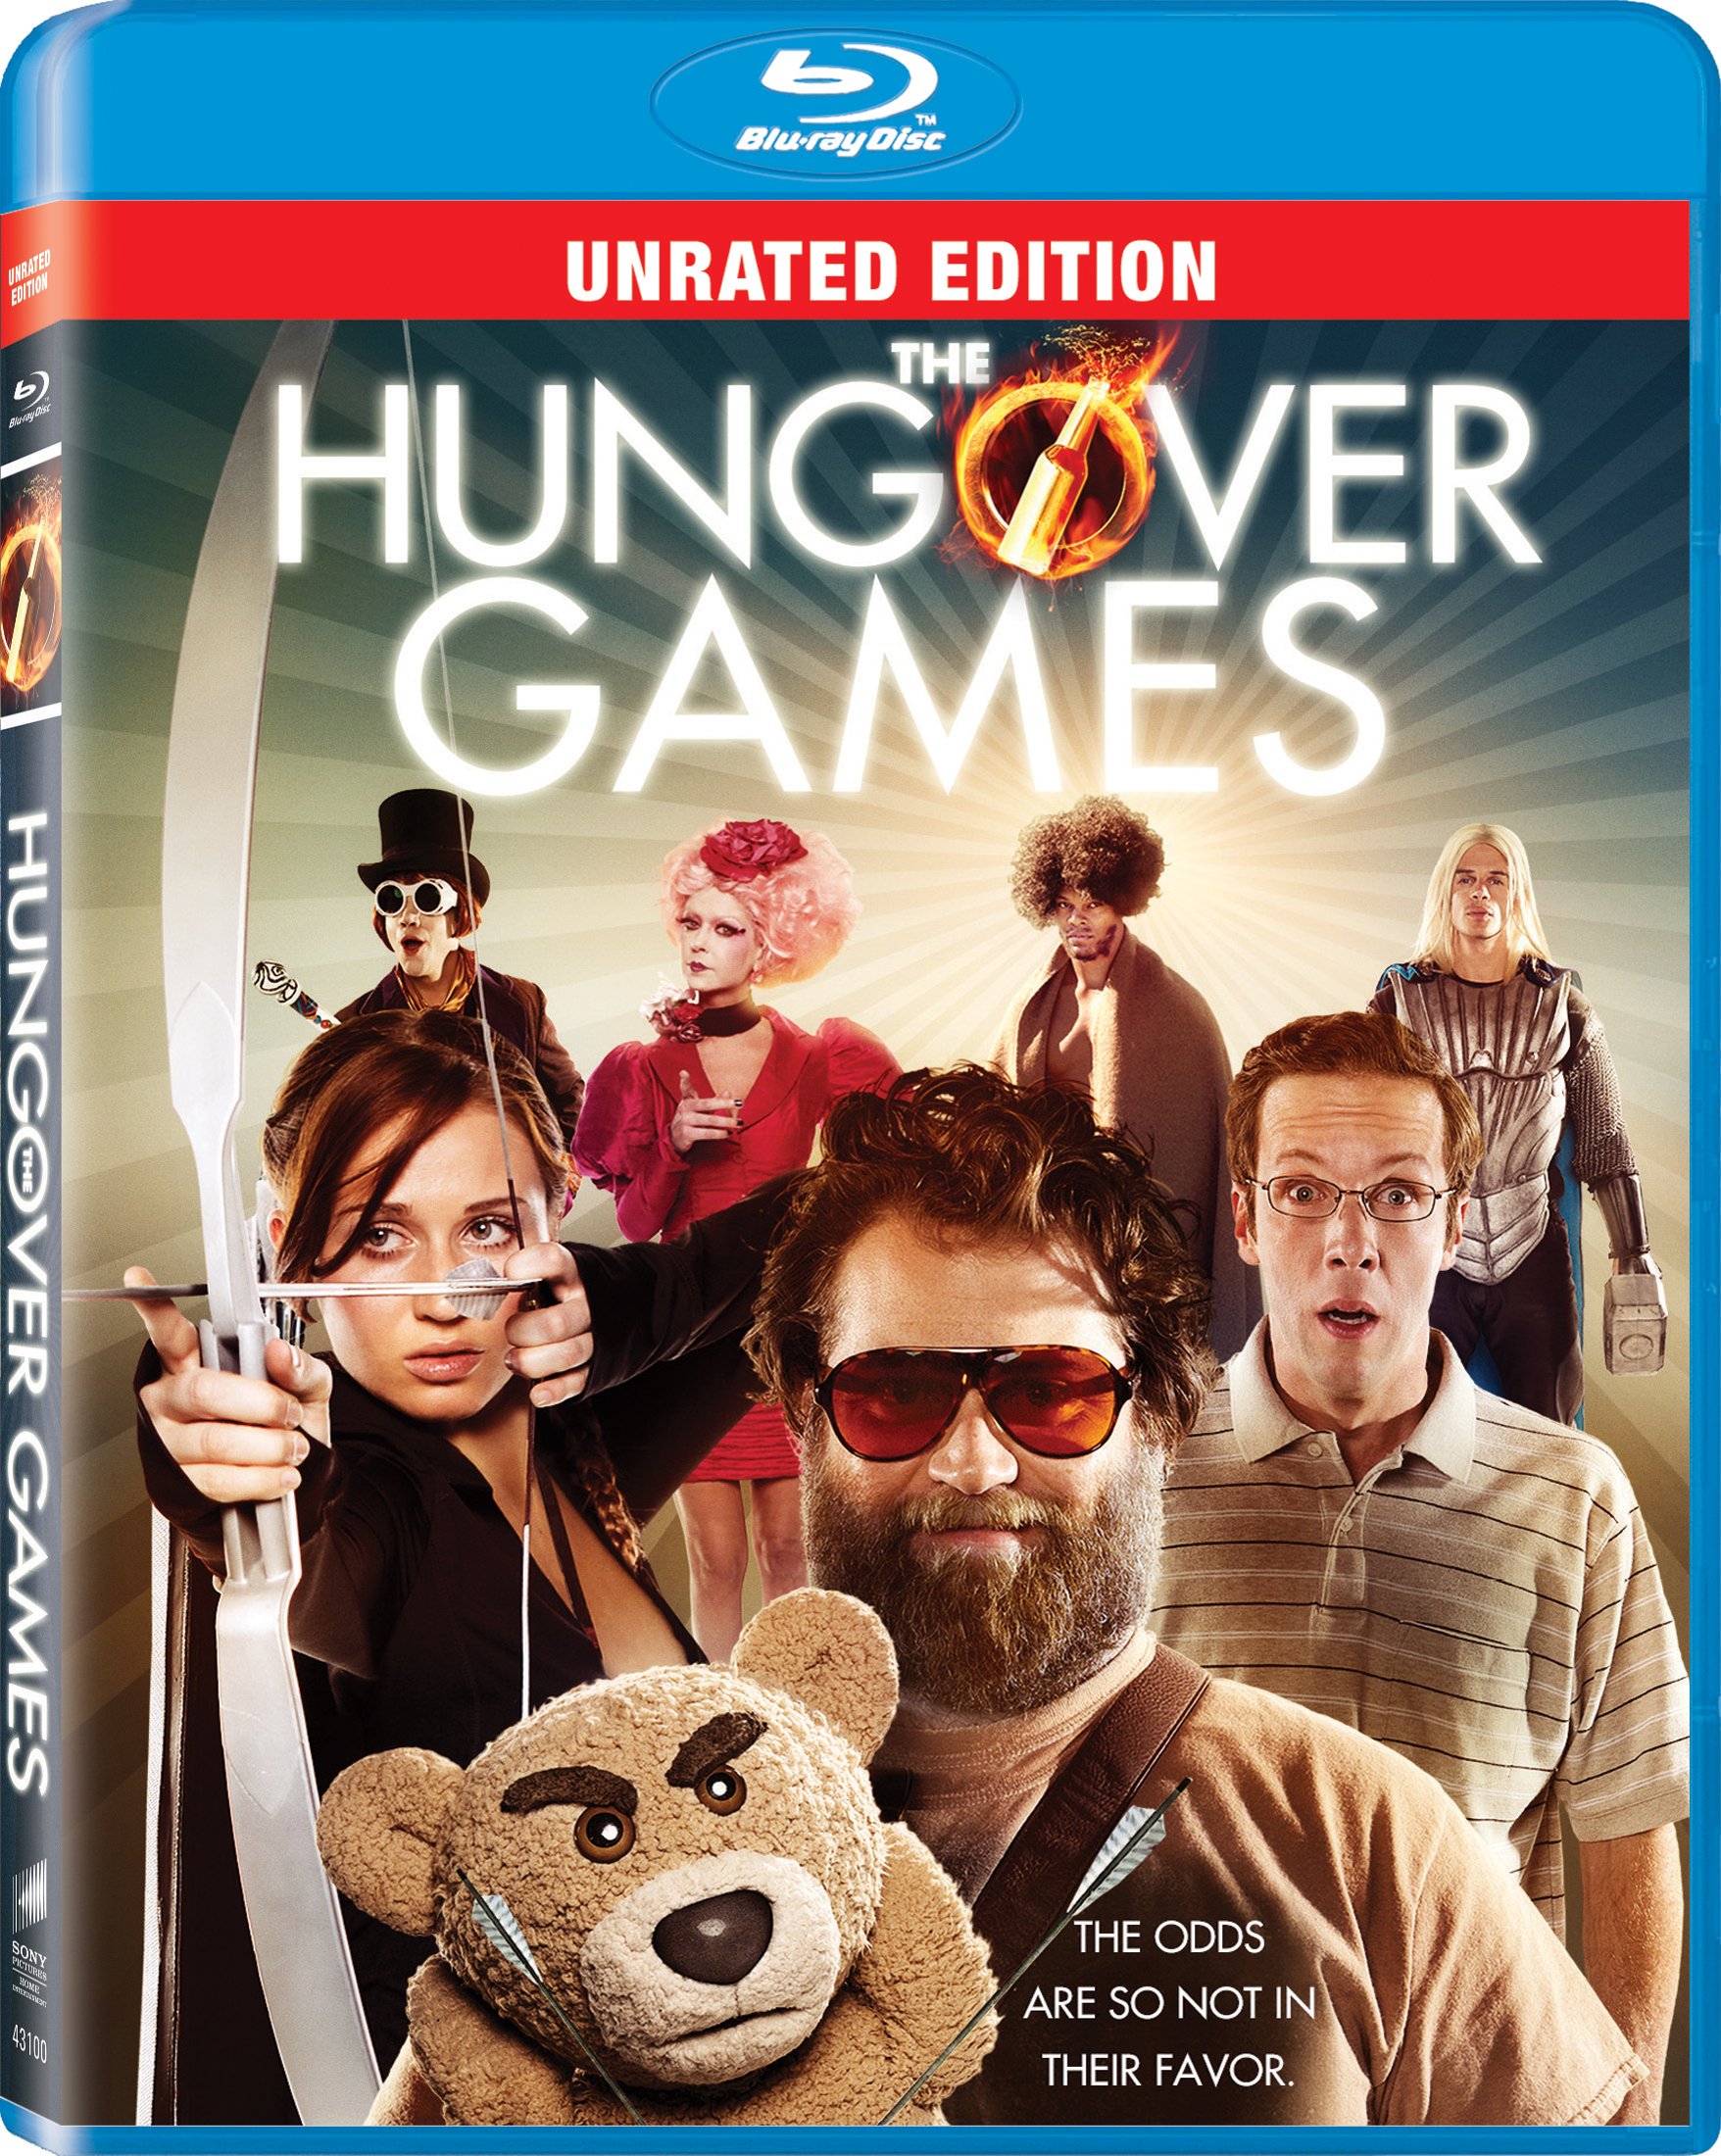 The Hungover Games DVD Release Date March 11, 2014